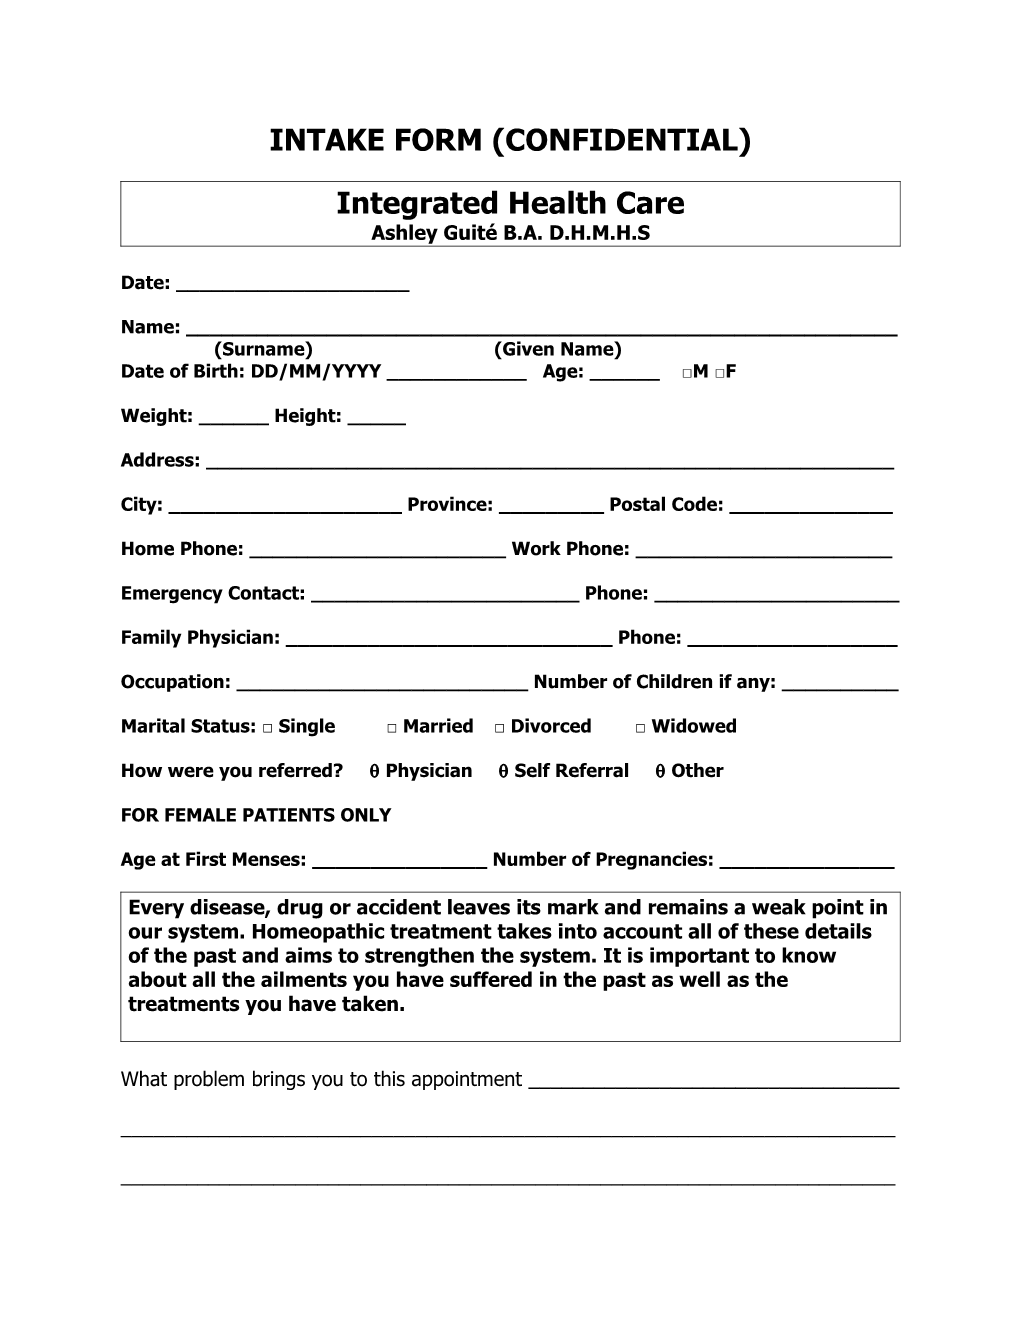 Adult Intake Form (Confidential)